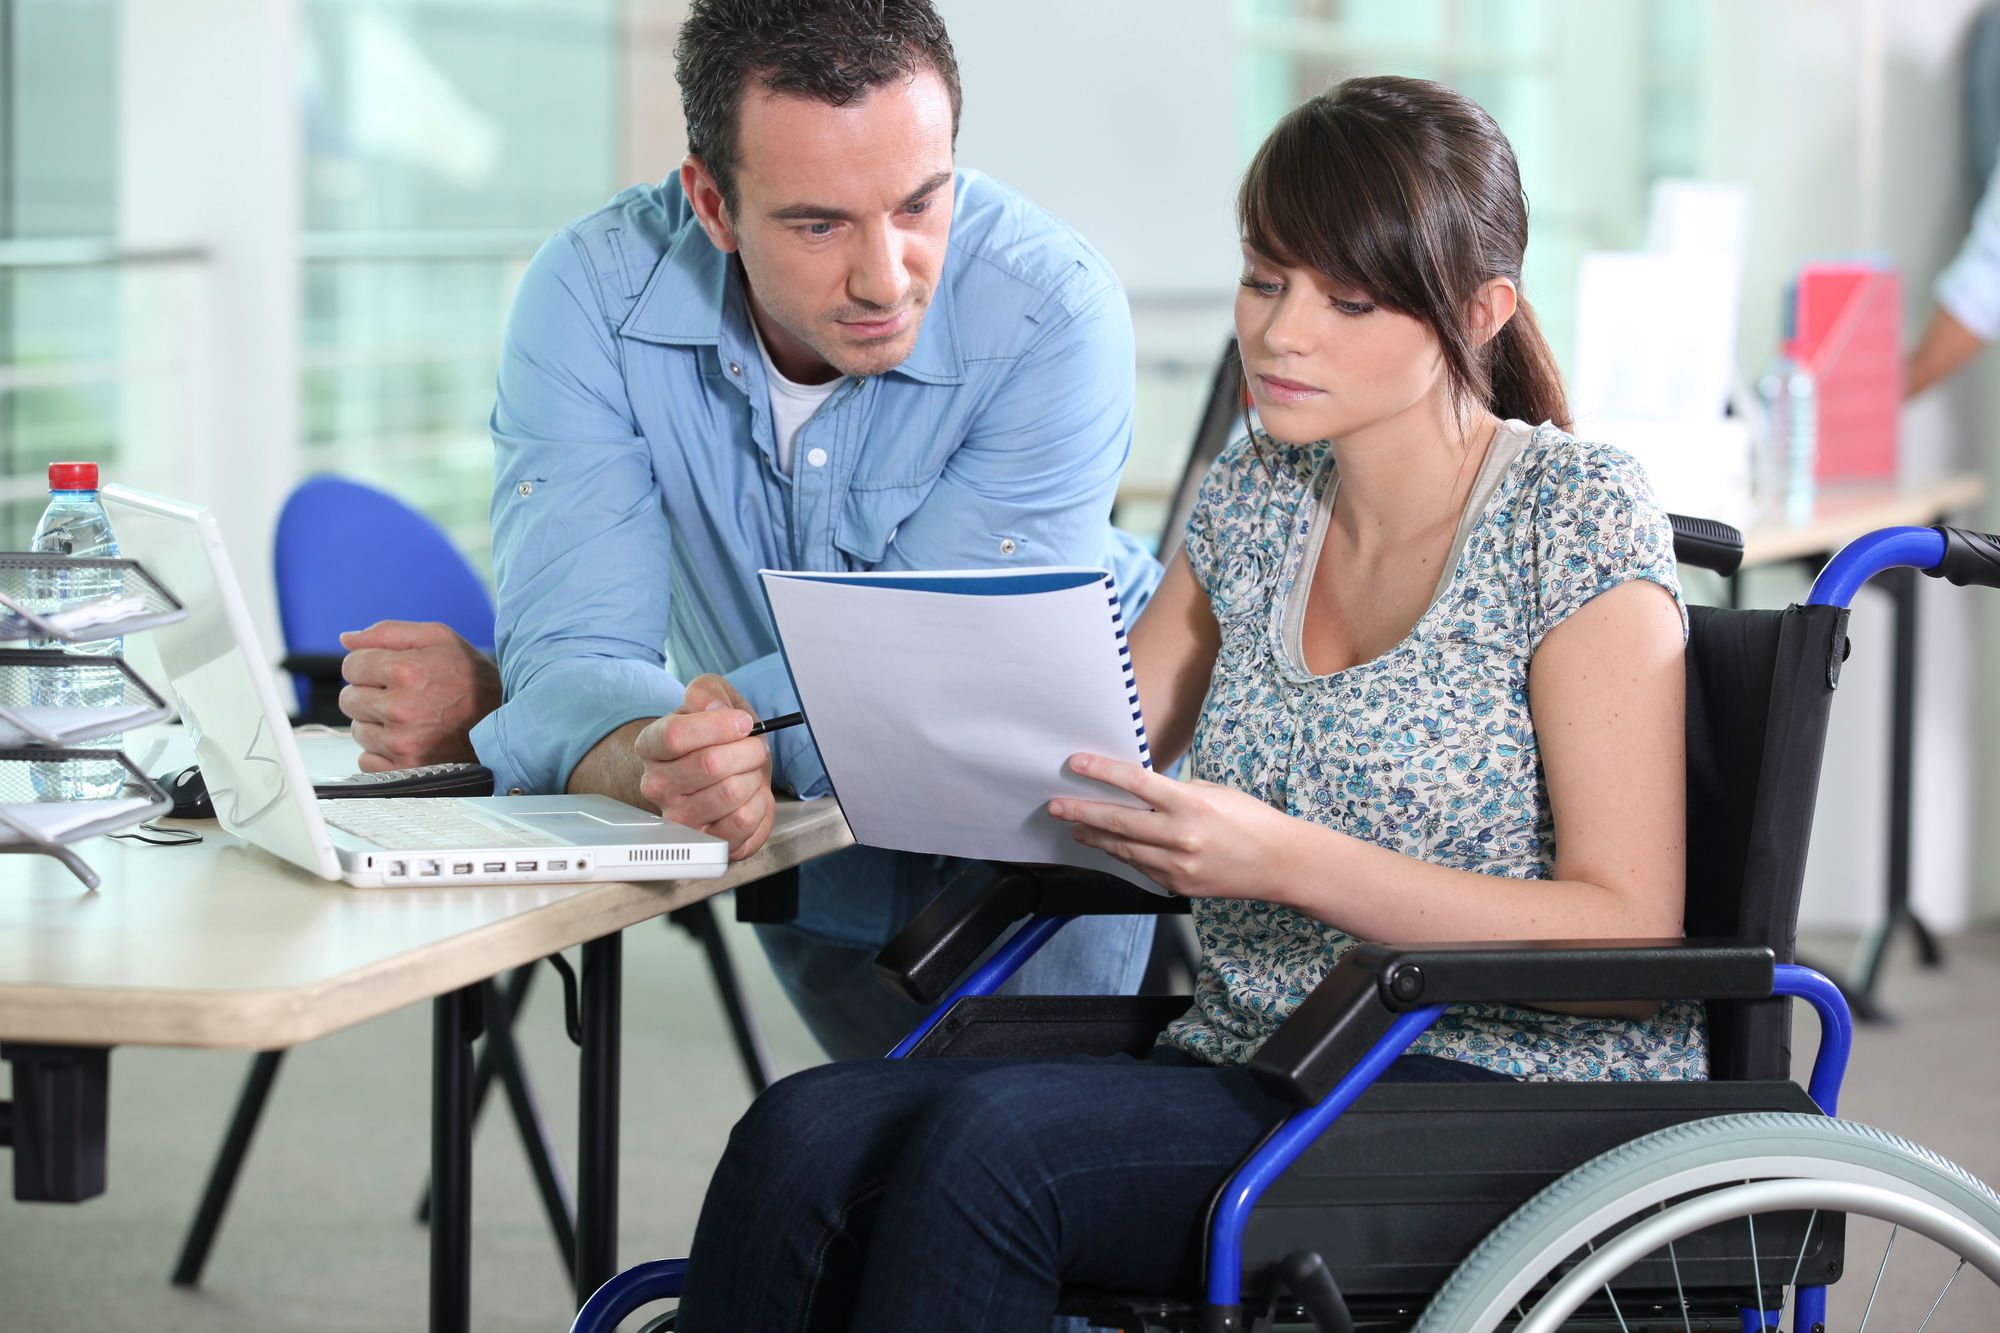 Woman in wheelchair reviews disability insurance coverage with a male colleague.